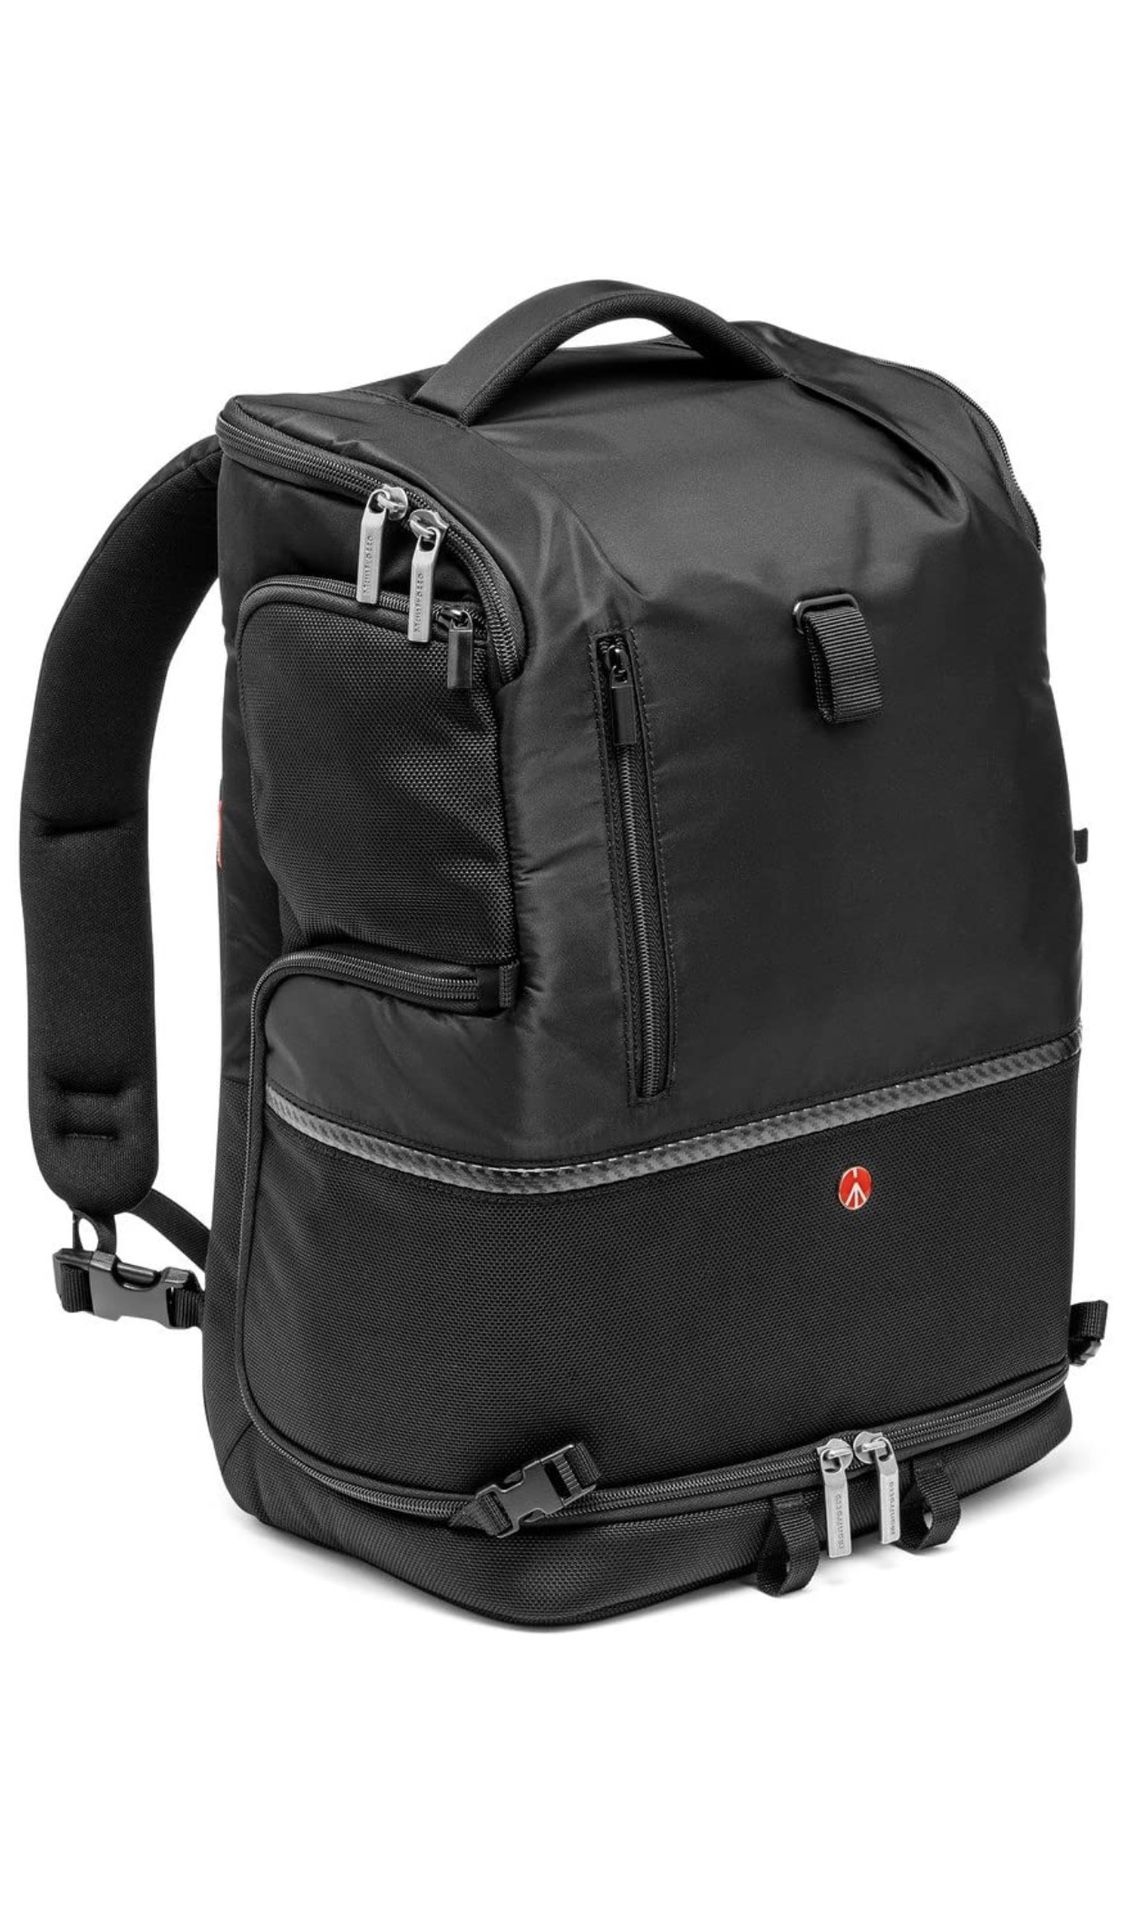 Manfrotto backpack